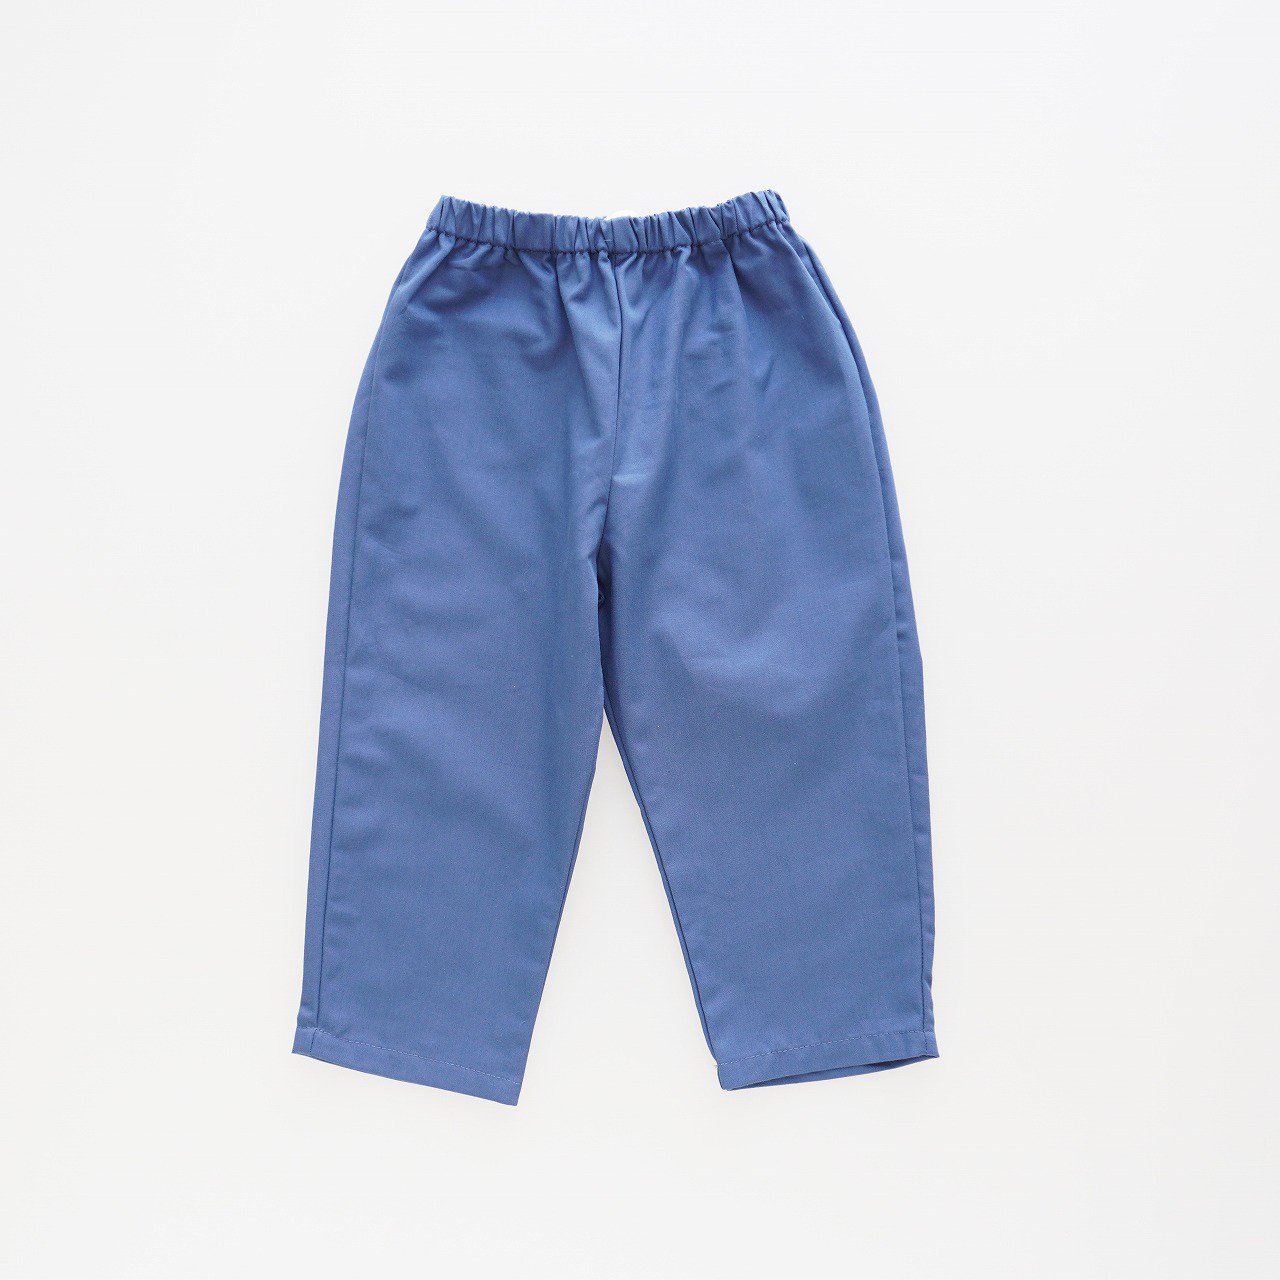 50% - Amaia Kids - TITO trousers (Blue navy)